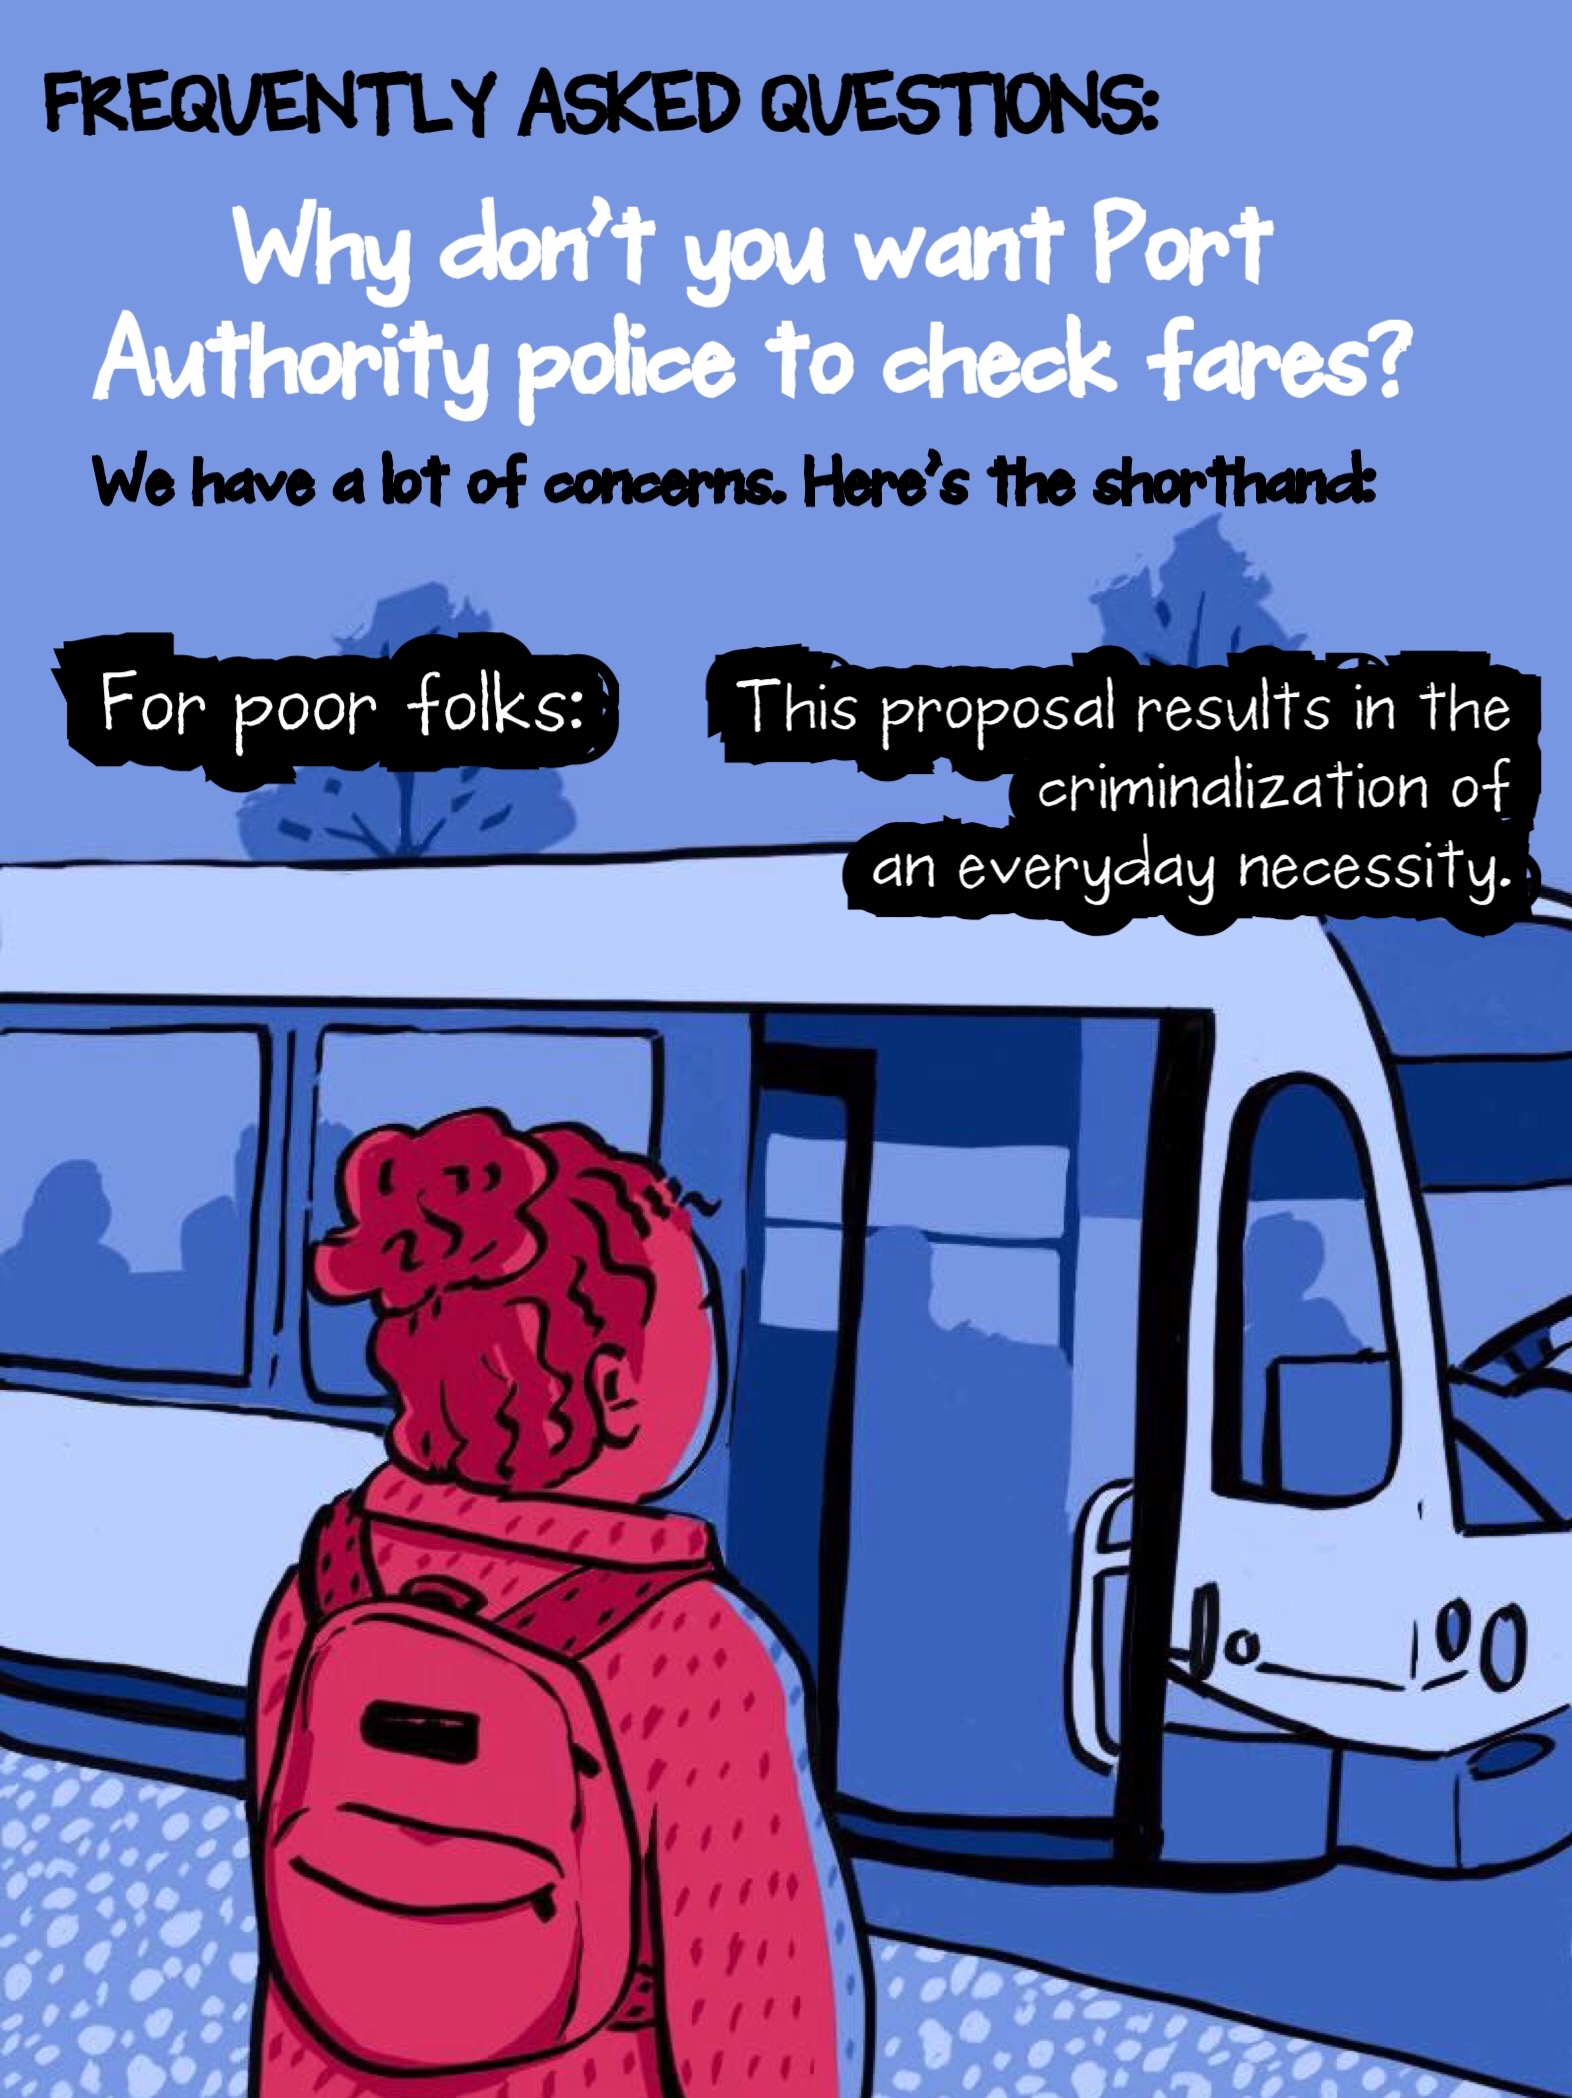 poor - FAQ about Port Authority's Proposed "Proof of Payment" Fare Enforcement